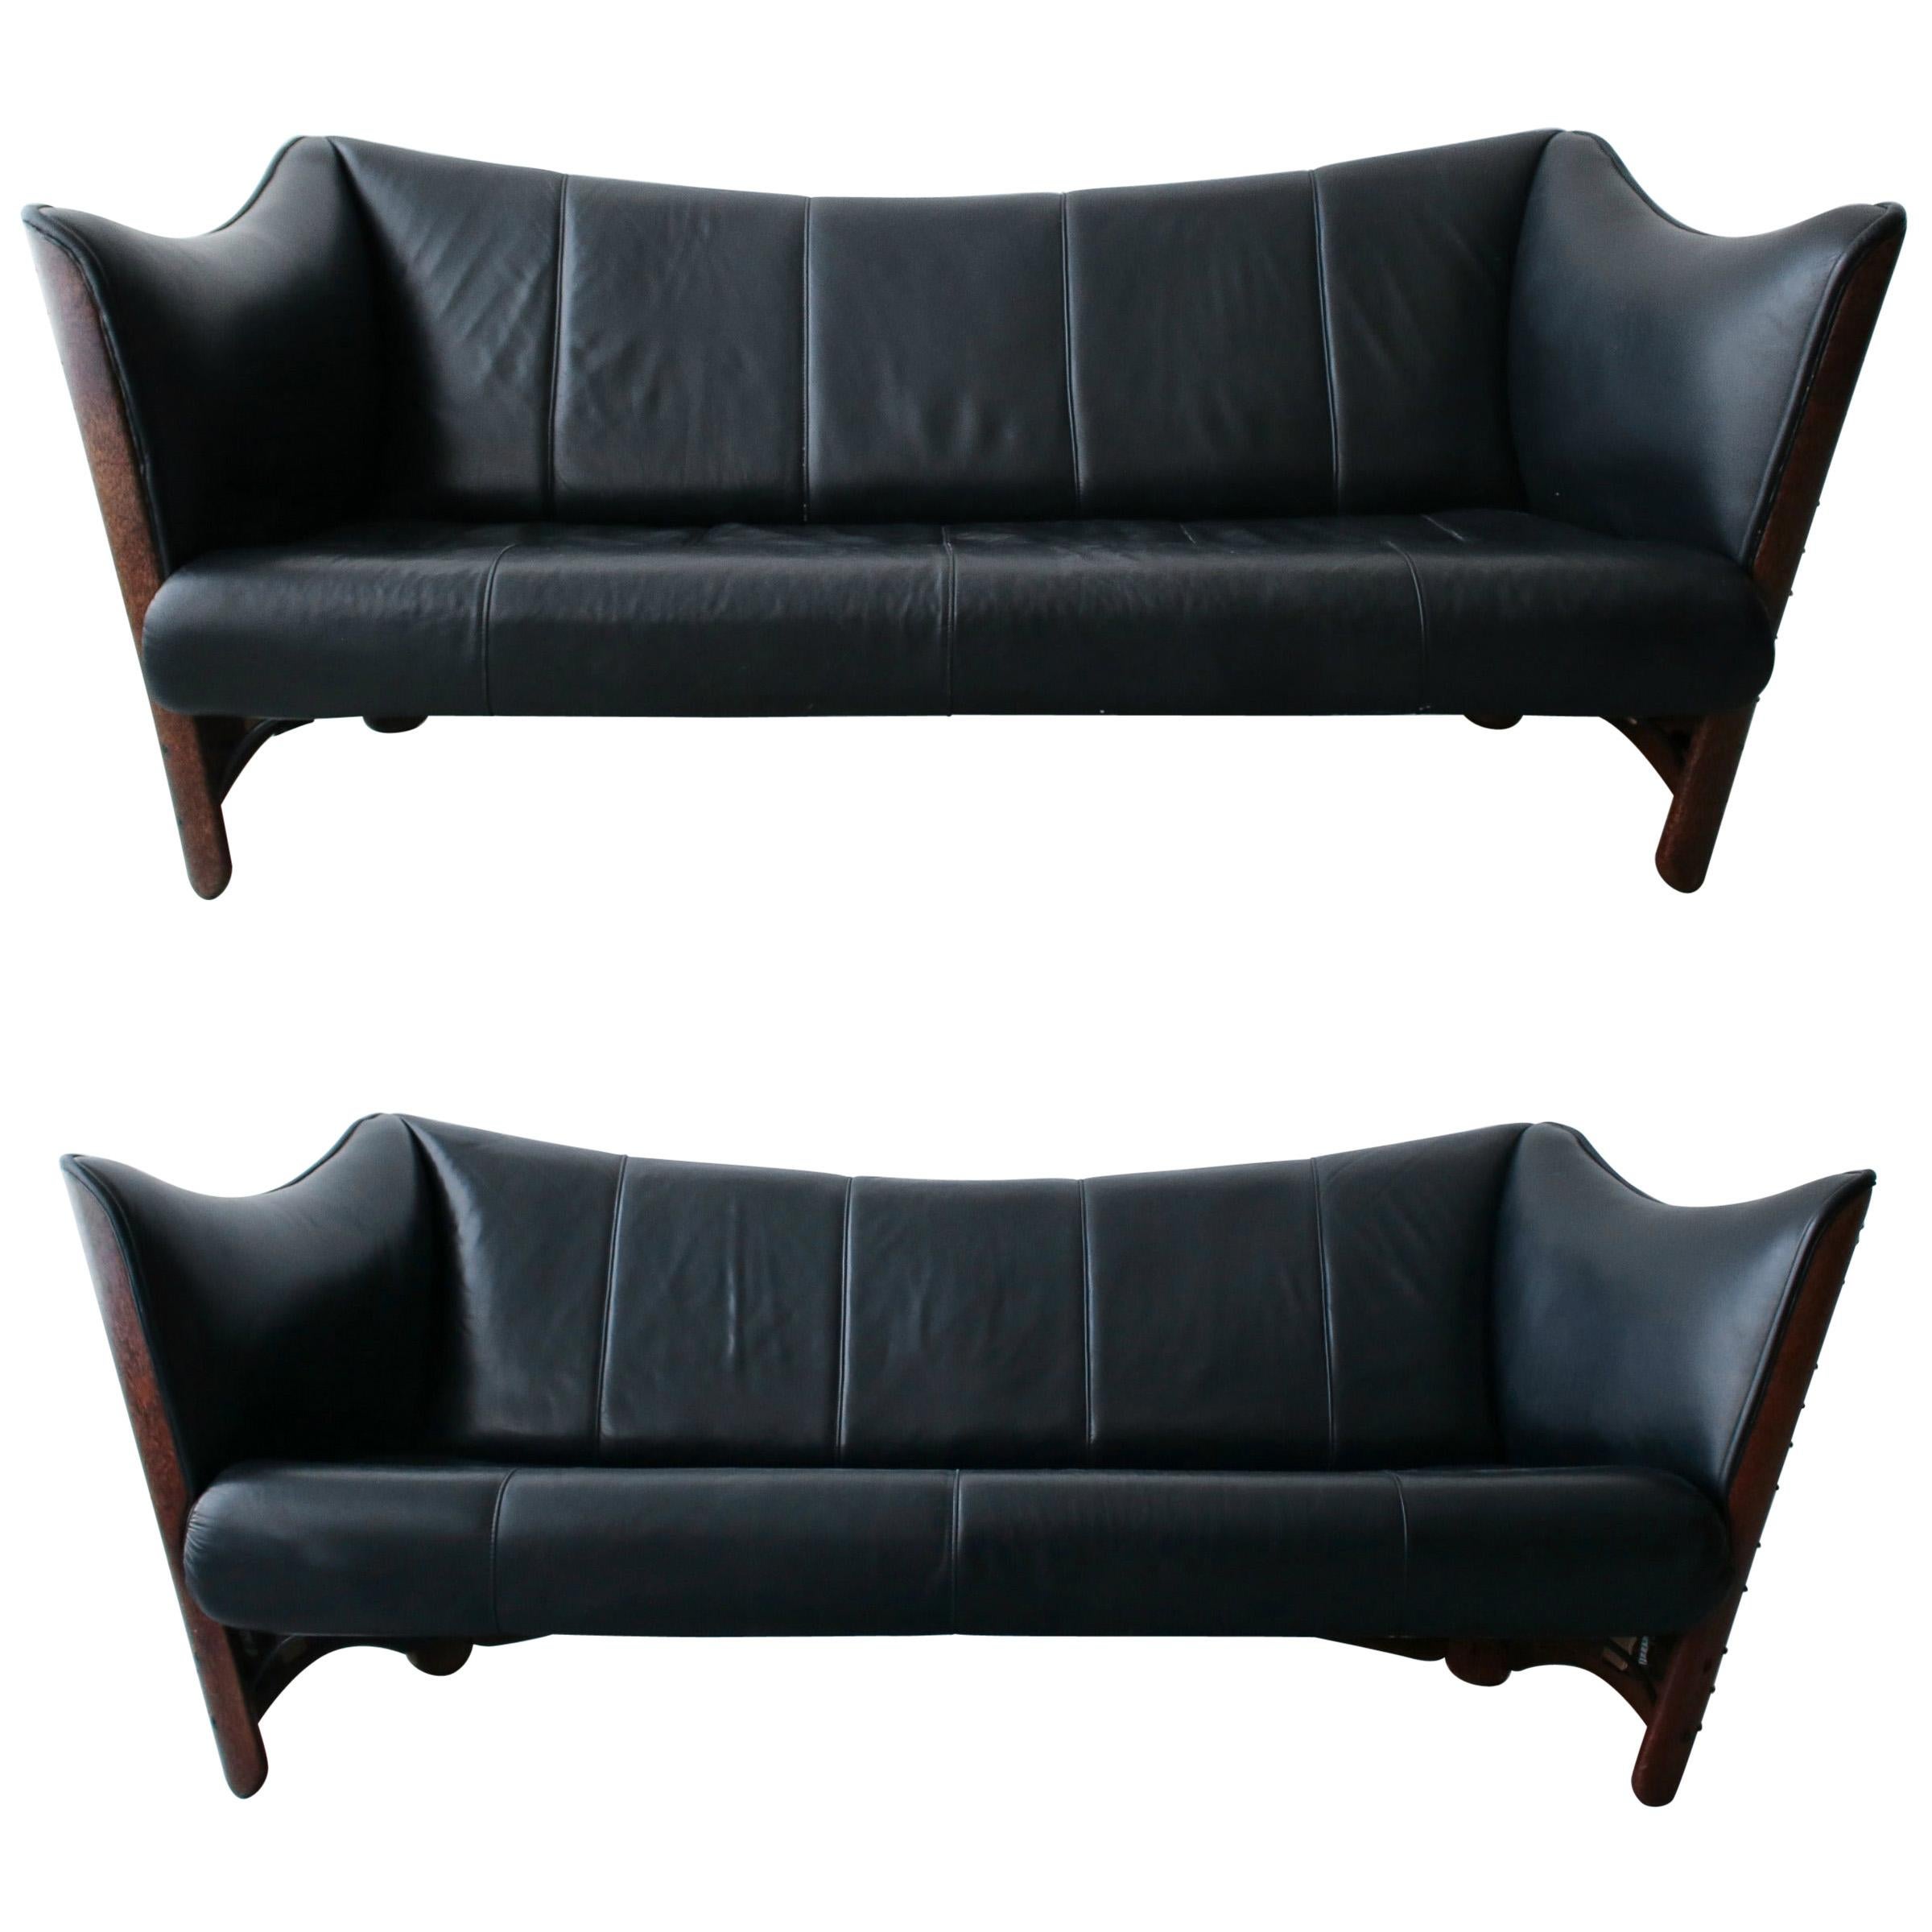 Pair of Pacific Green Palmwood and Leather Cayenne Sofas